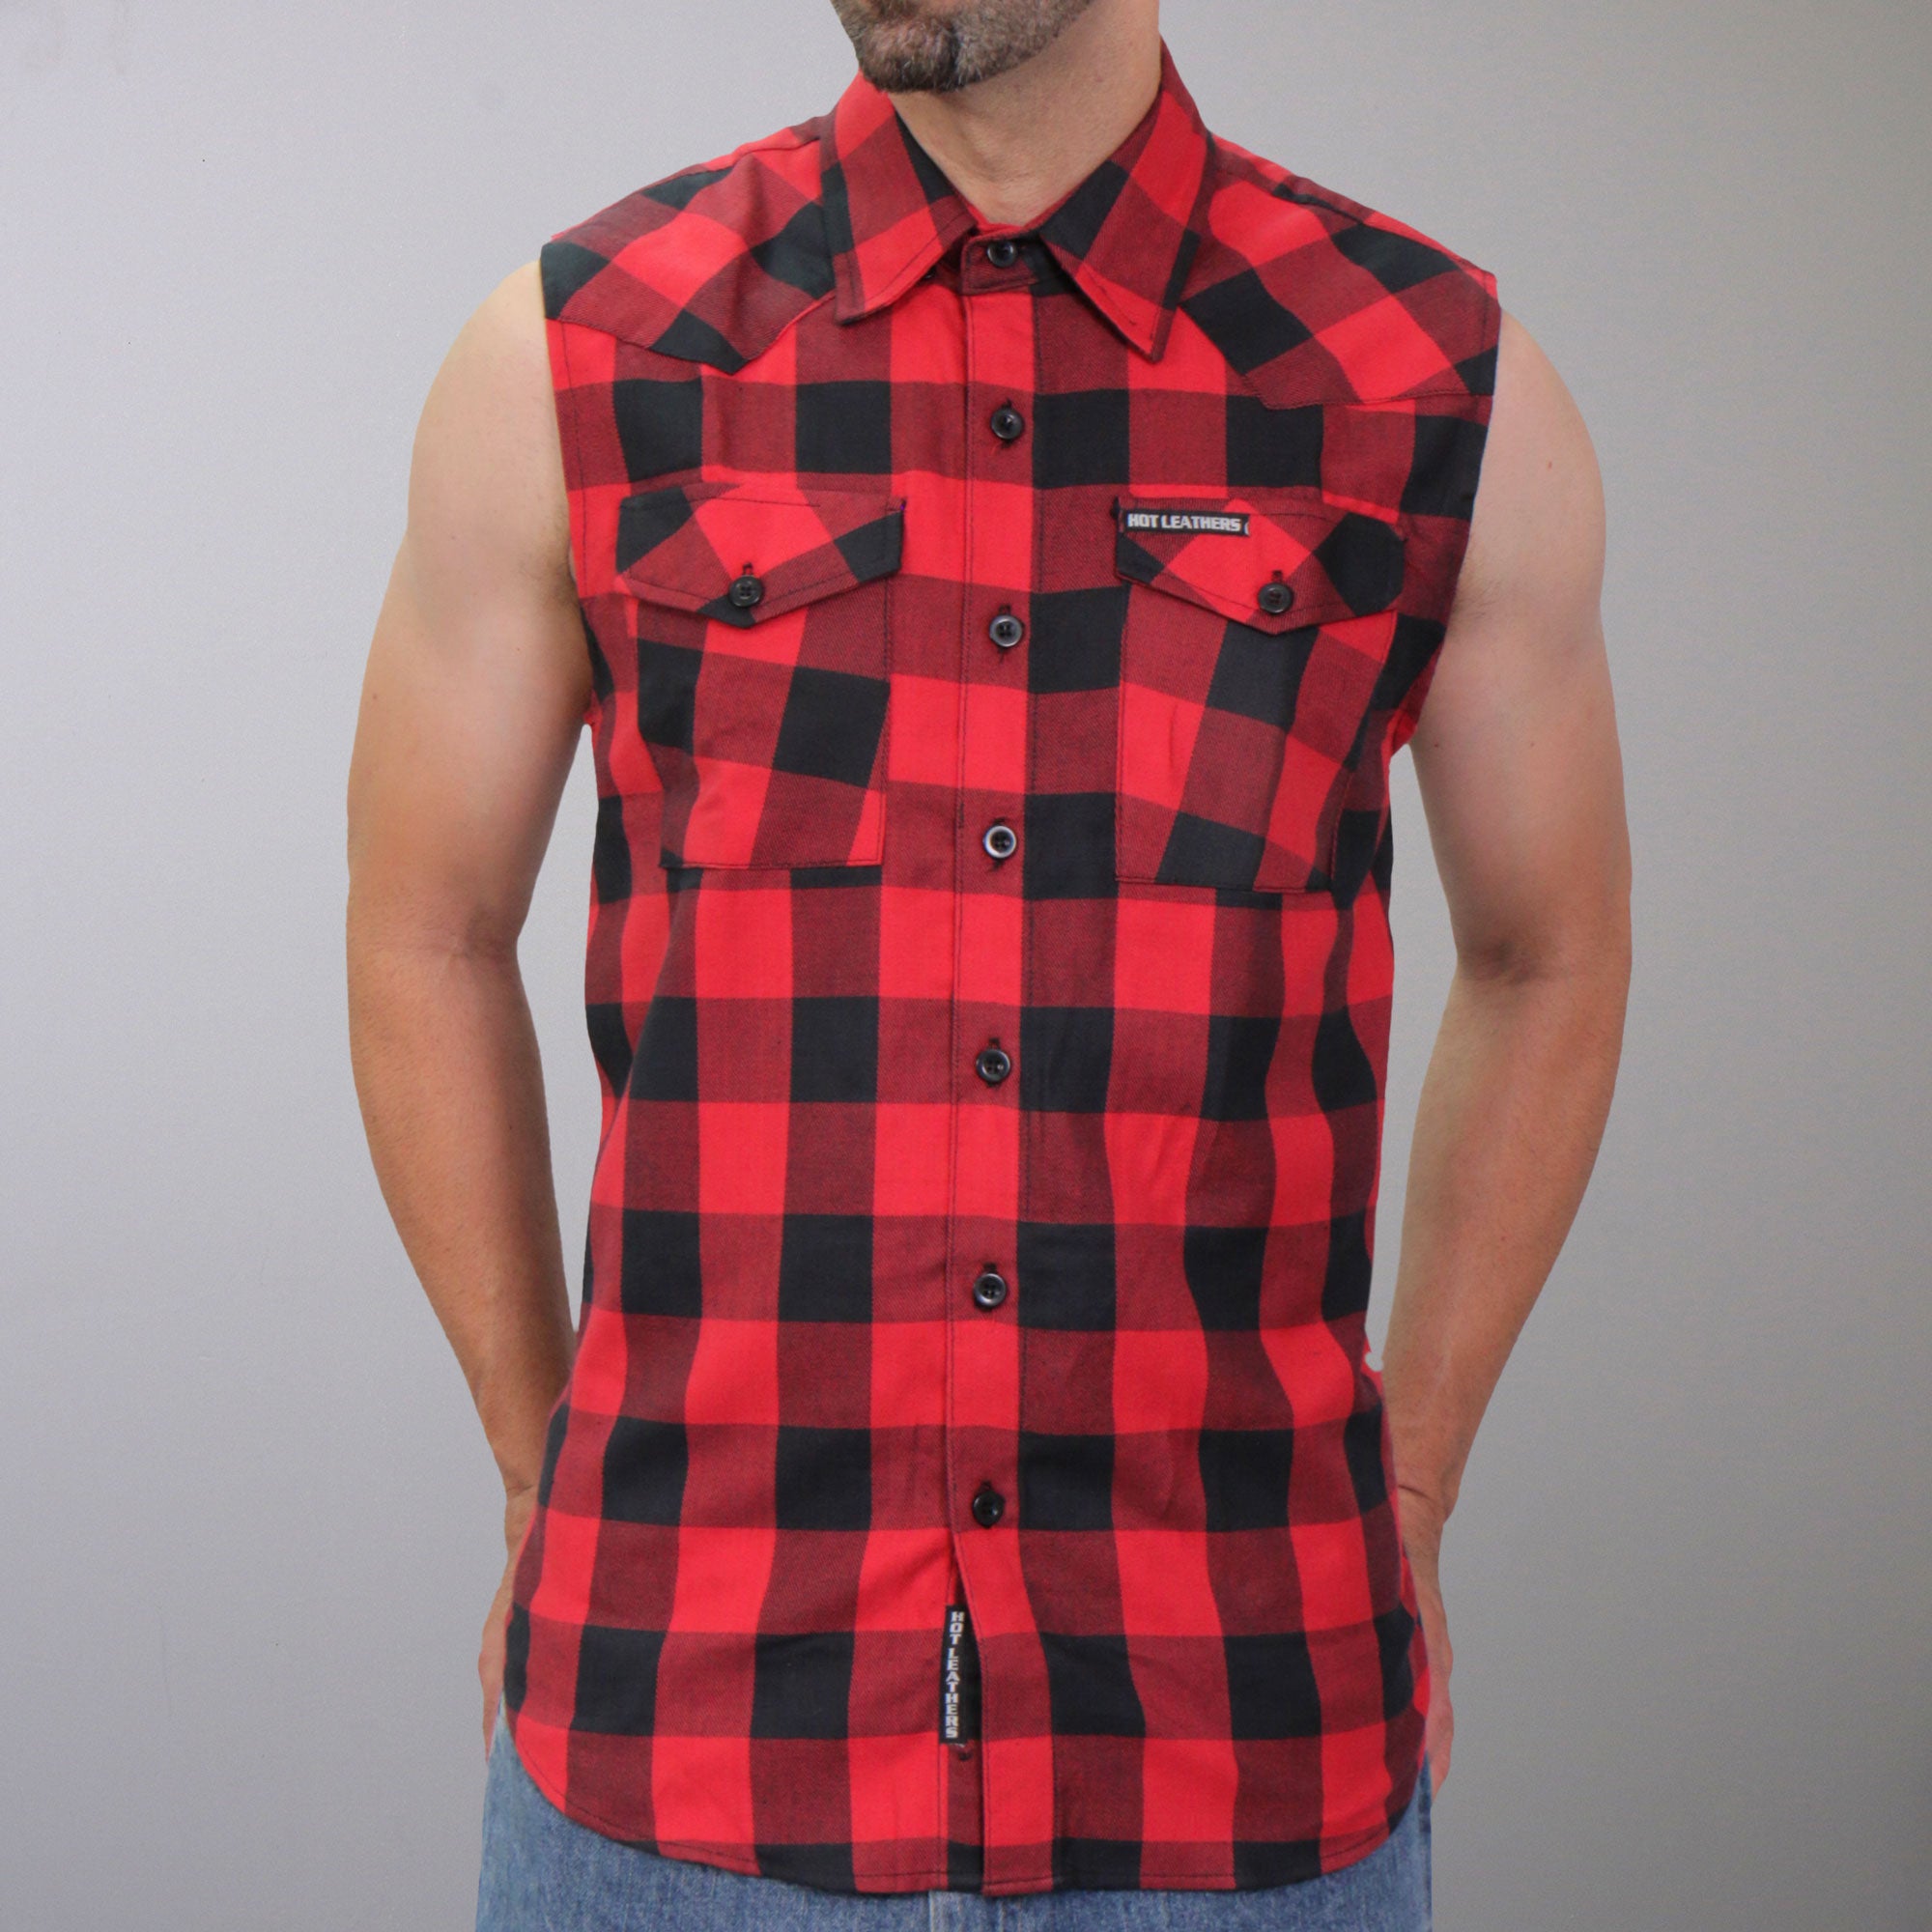 Hot Leathers GMS3491 Men’s Black and Red Patriot Skull Sleeveless Flannel Shirt